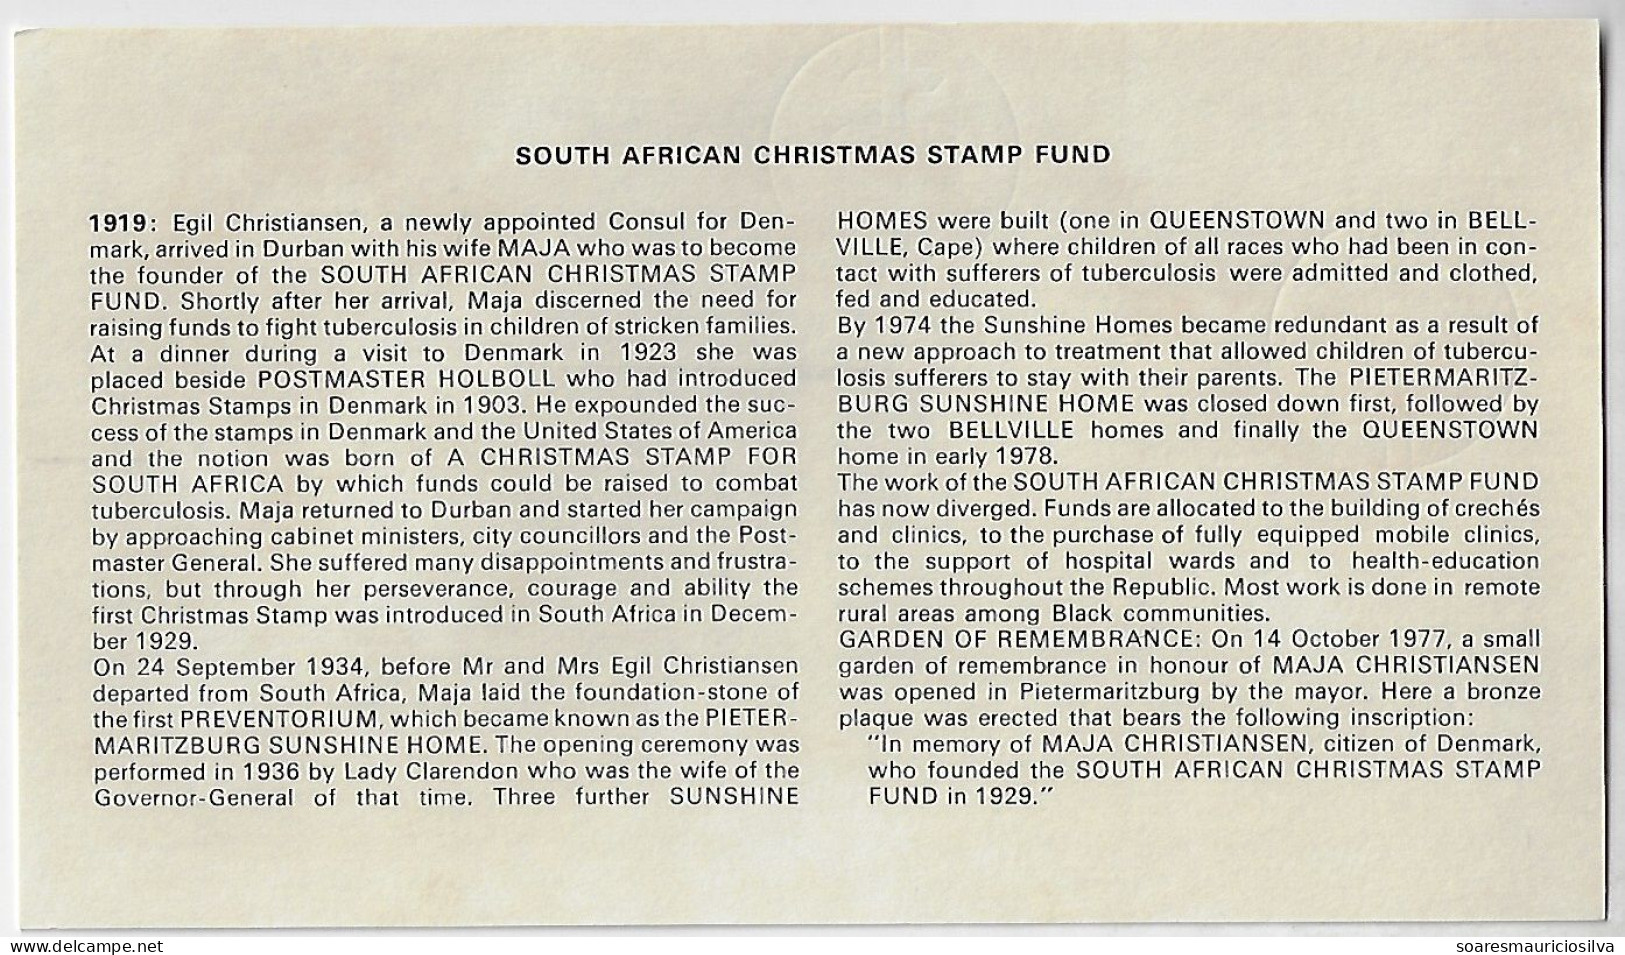 South Africa 1979 FDC First Day Cover Stamp Commemorative Cancel Sout African Christmas Stamp Fund - FDC